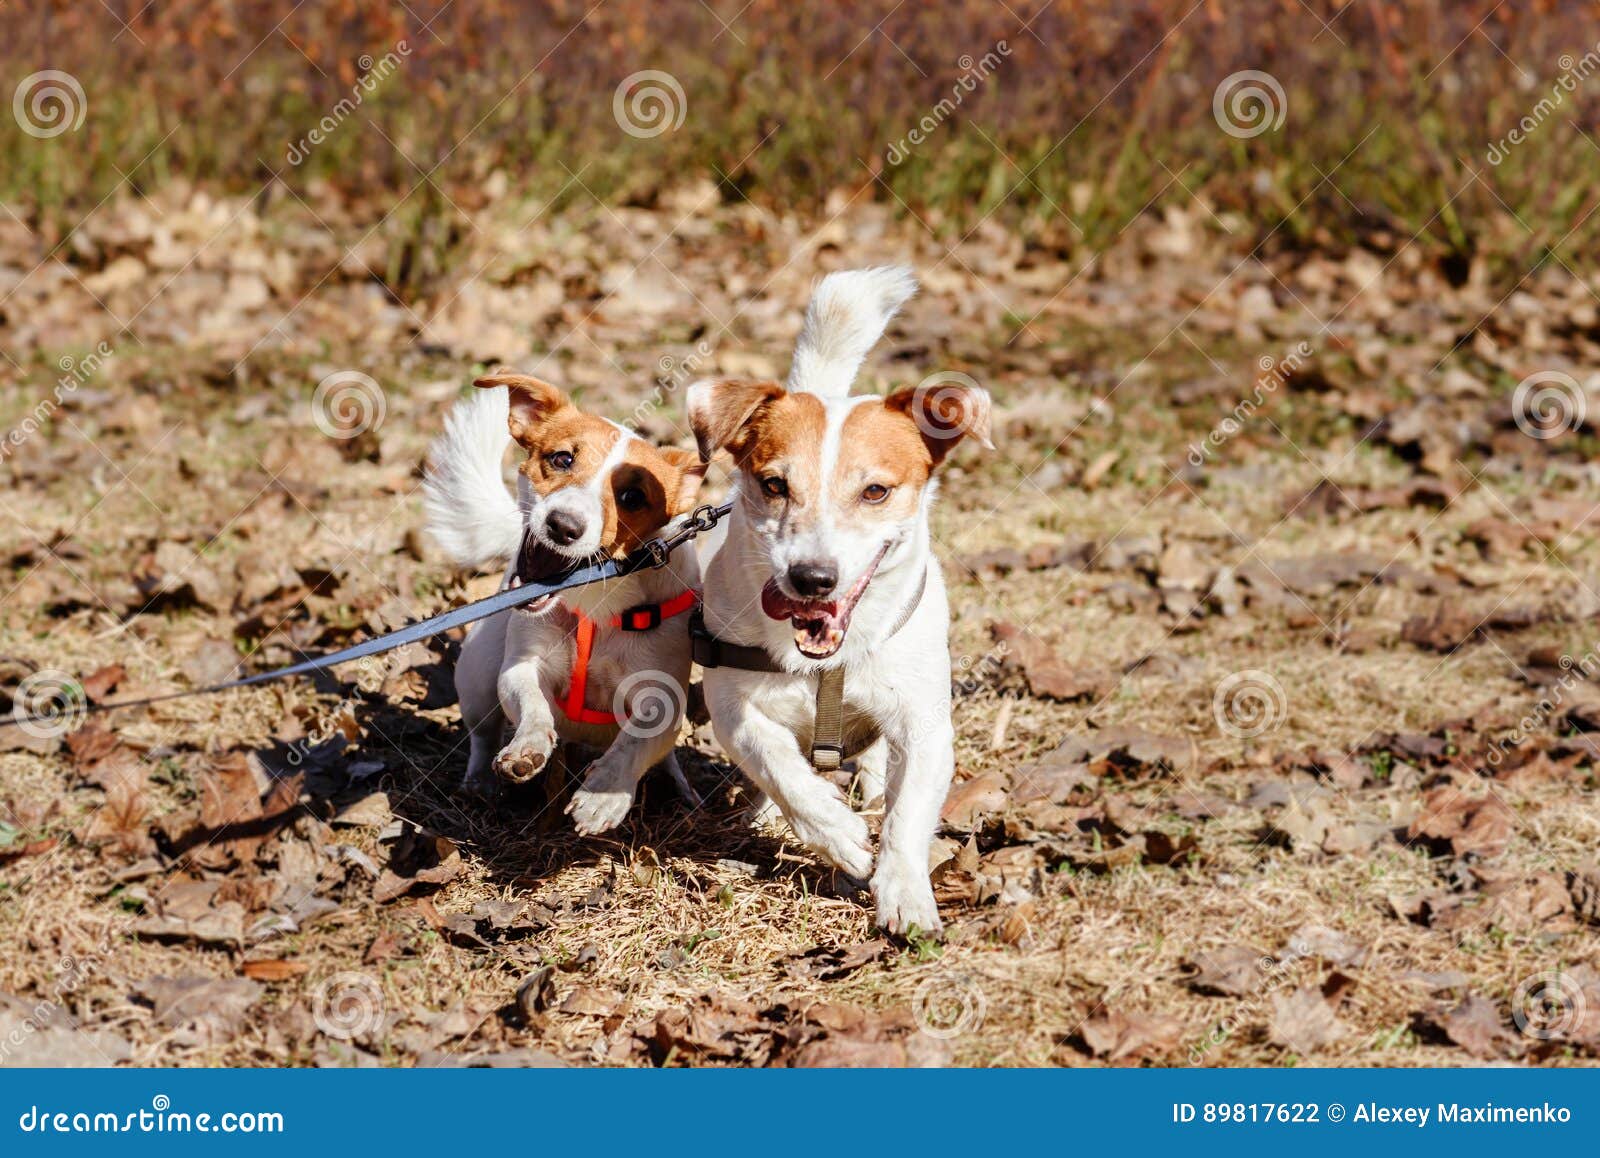 Dog Biting Leash Trying To Release His Mate Free Stock